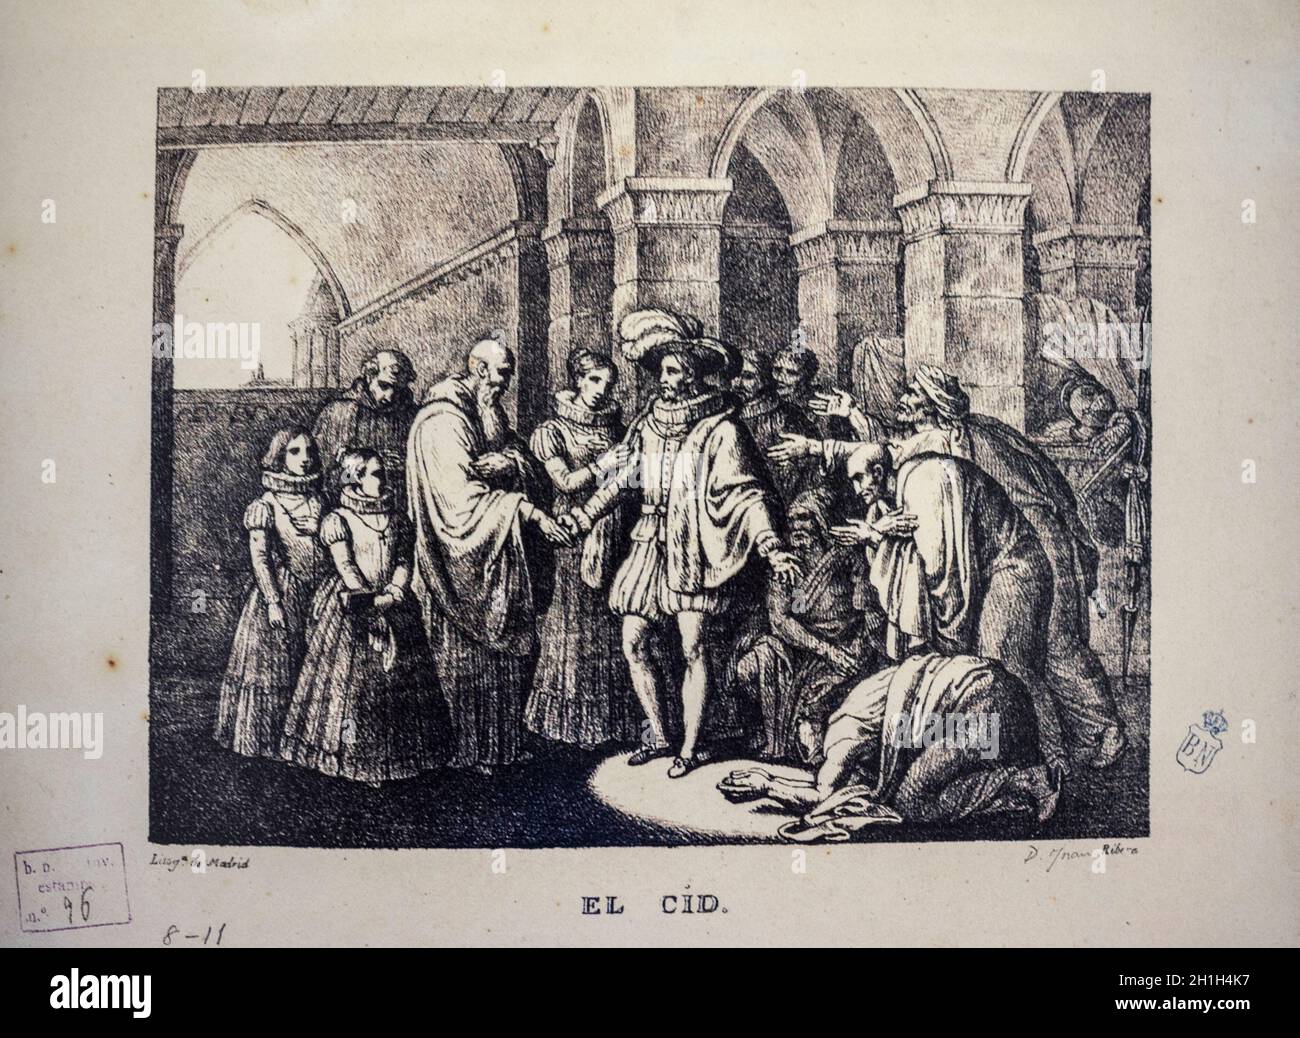 El Cid saying goodbye to Jimena and their two daughters. Lithography by Juan Antonio de Ribera. National Library, Madrid Stock Photo